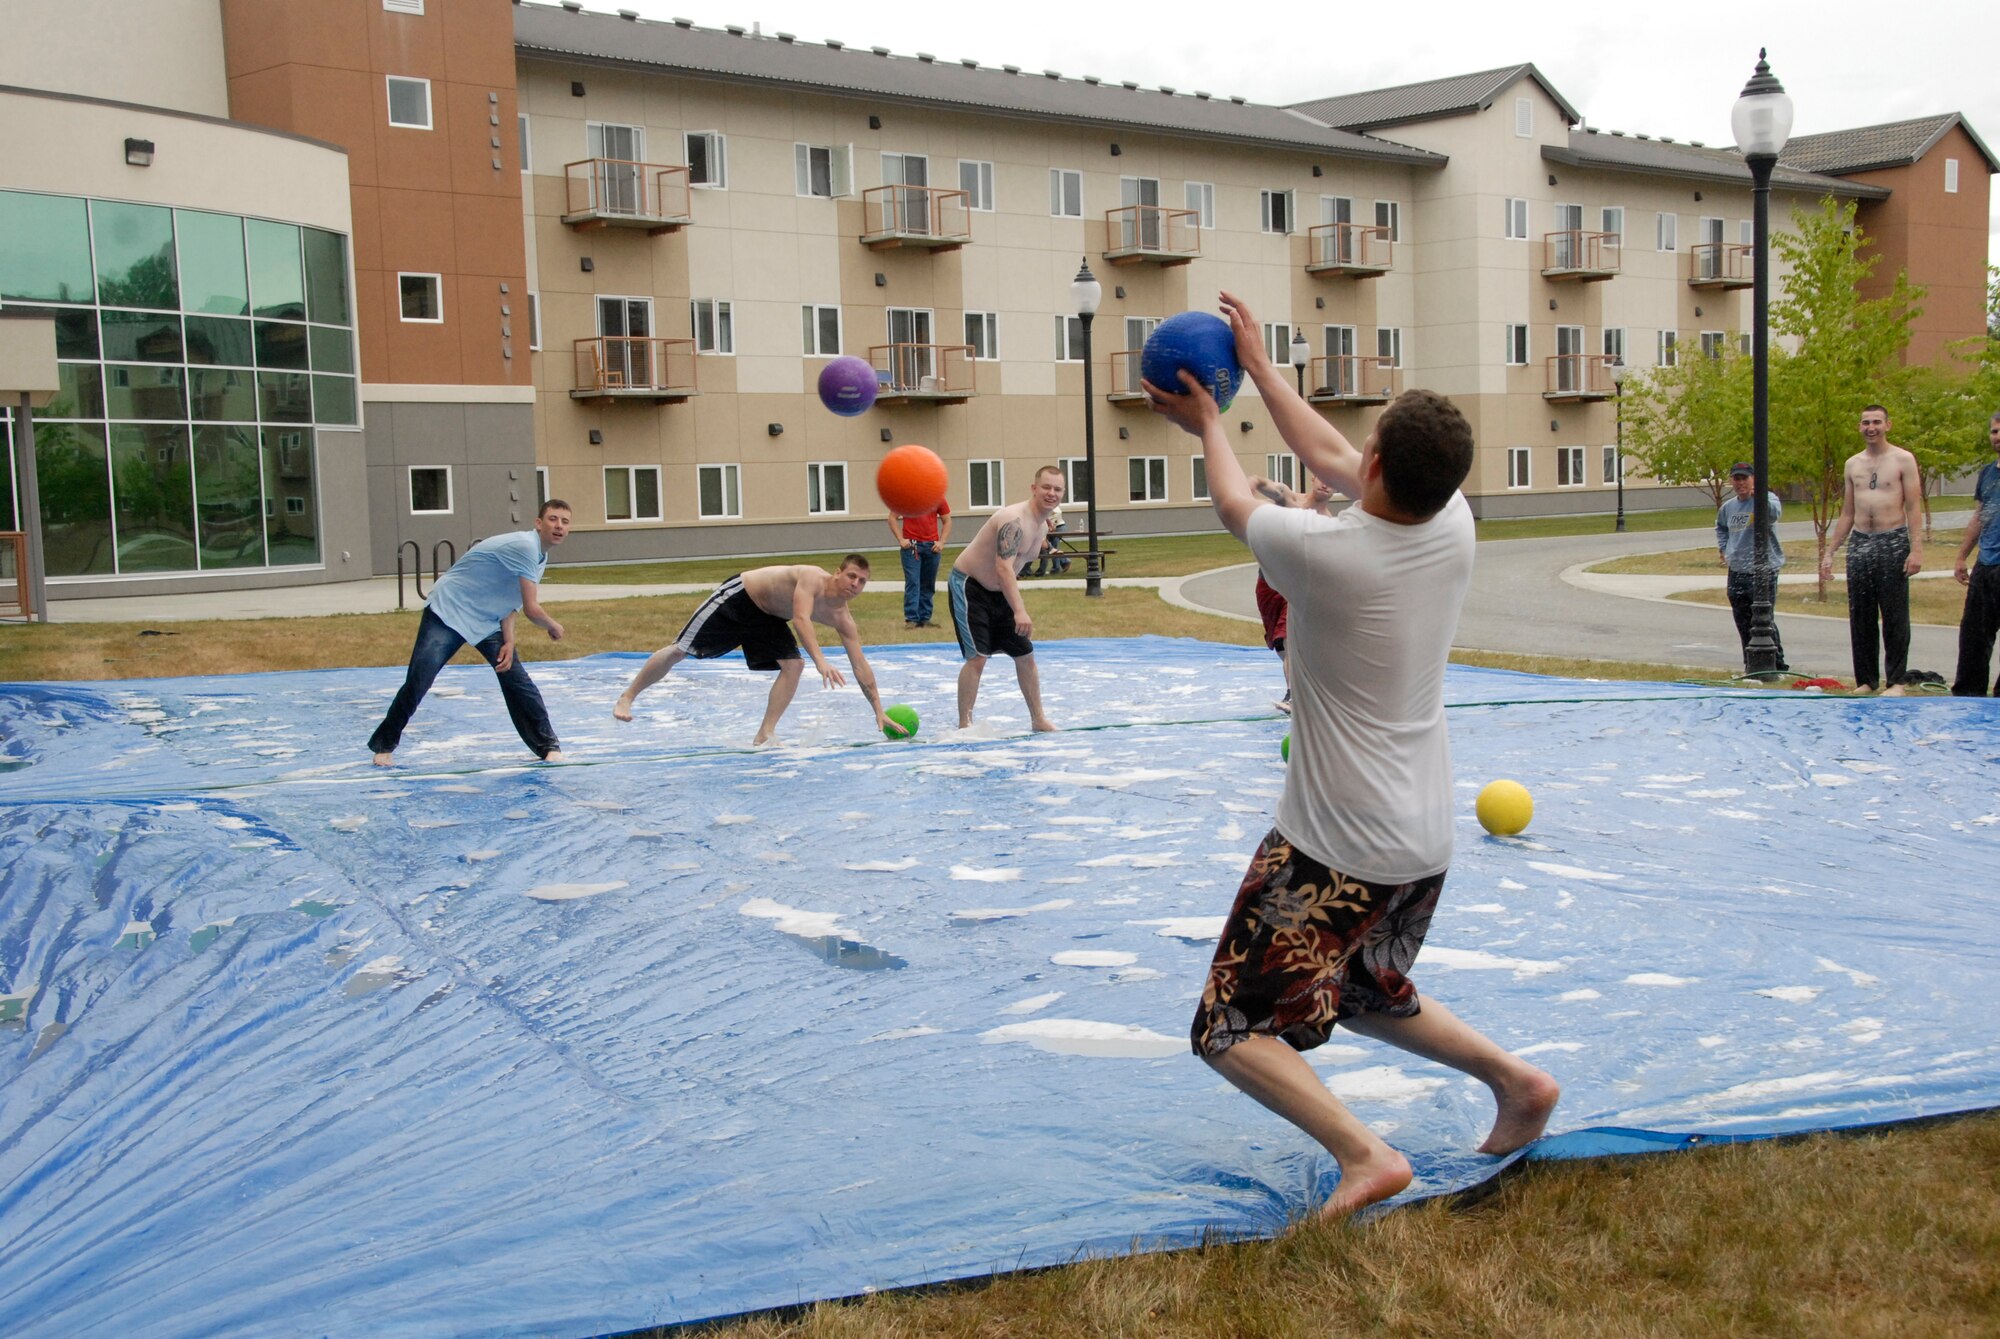 ELMENDORF AIR FORCE BASE, Alaska -- Airman 1st Class Paul Helms catches a ball against the opposing team, out-numbered 3-1, during a game of slip-n-slide dodge ball at the dormitories July 25. More than 100 Airmen participated in outdoor activities held during the Airman's Appreciation Barbecue.Helms is with the 3rd Aircraft Maintenance Squadron.(U.S. Air Force photo/Senior Airman Cynthia Spalding)